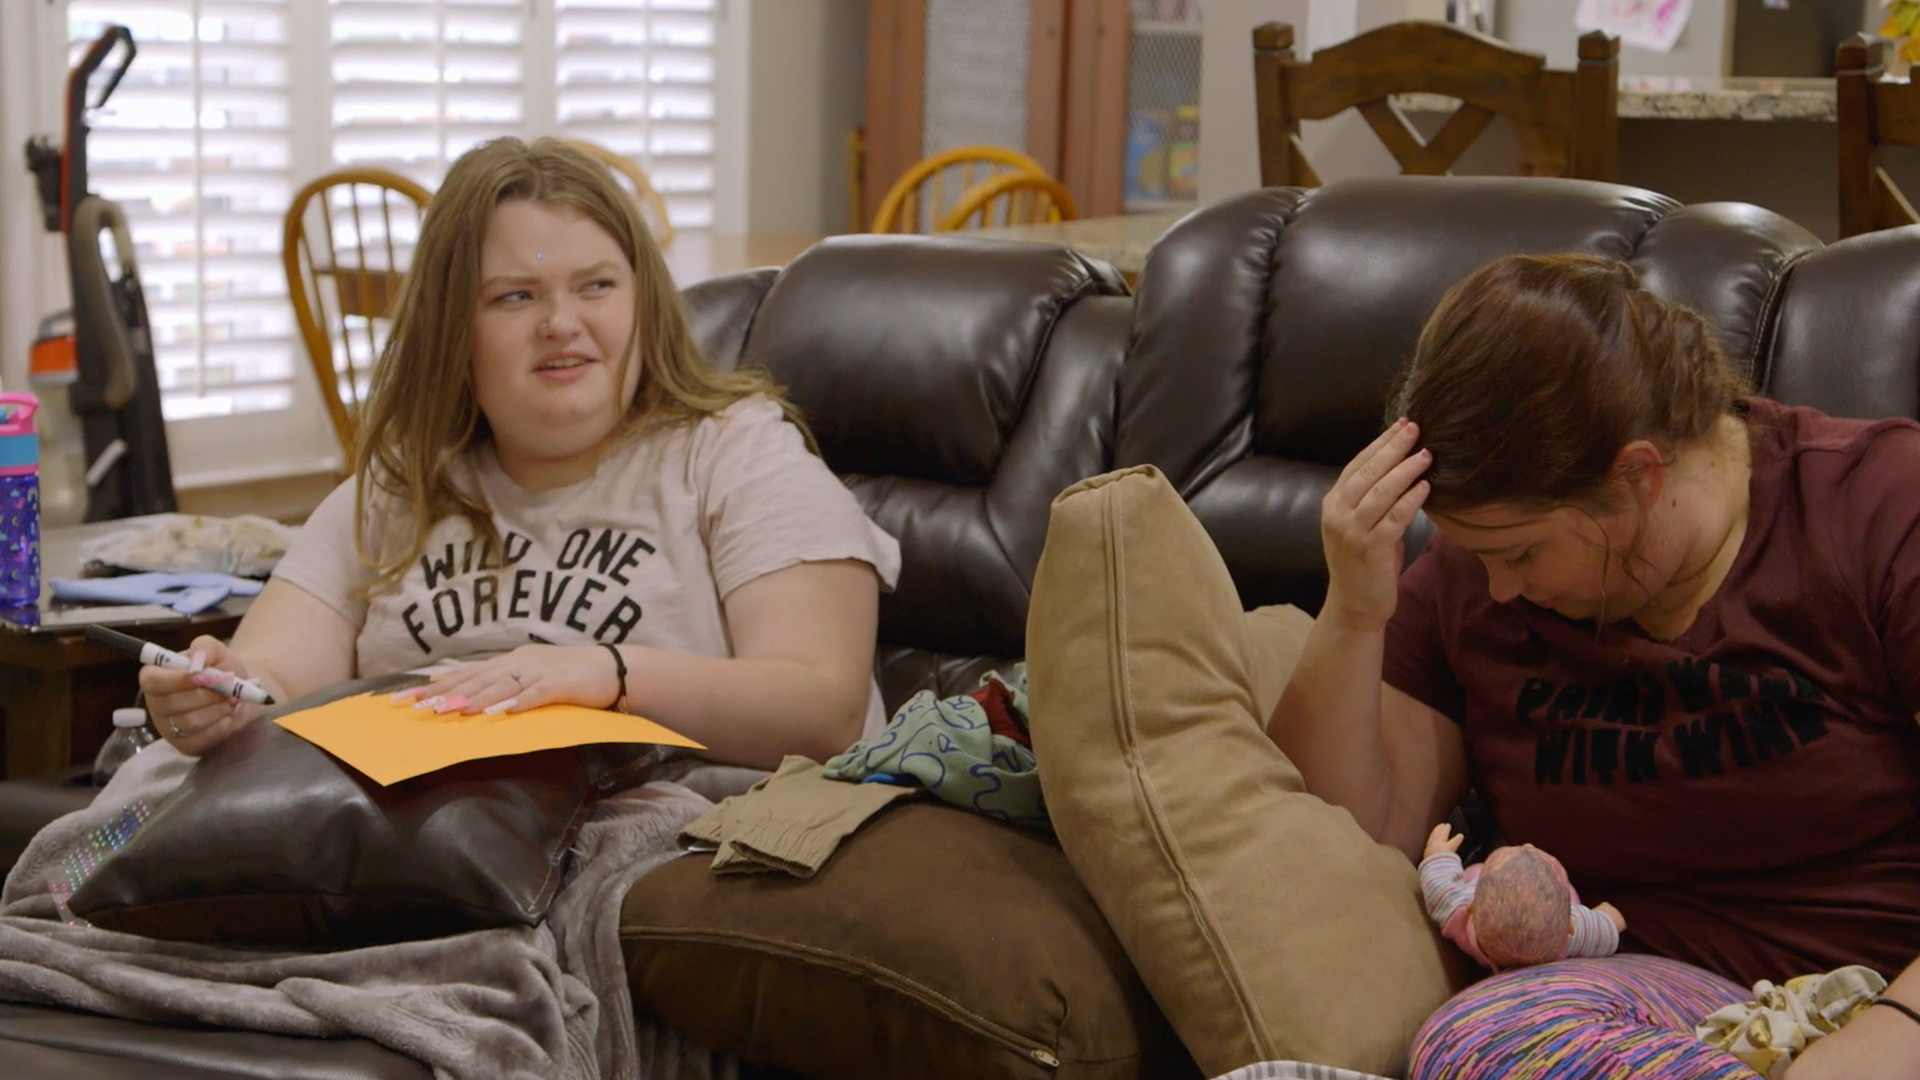 Watch The Family Is Fed up With June’s Behavior | Mama June: From Not to Hot Video Extras